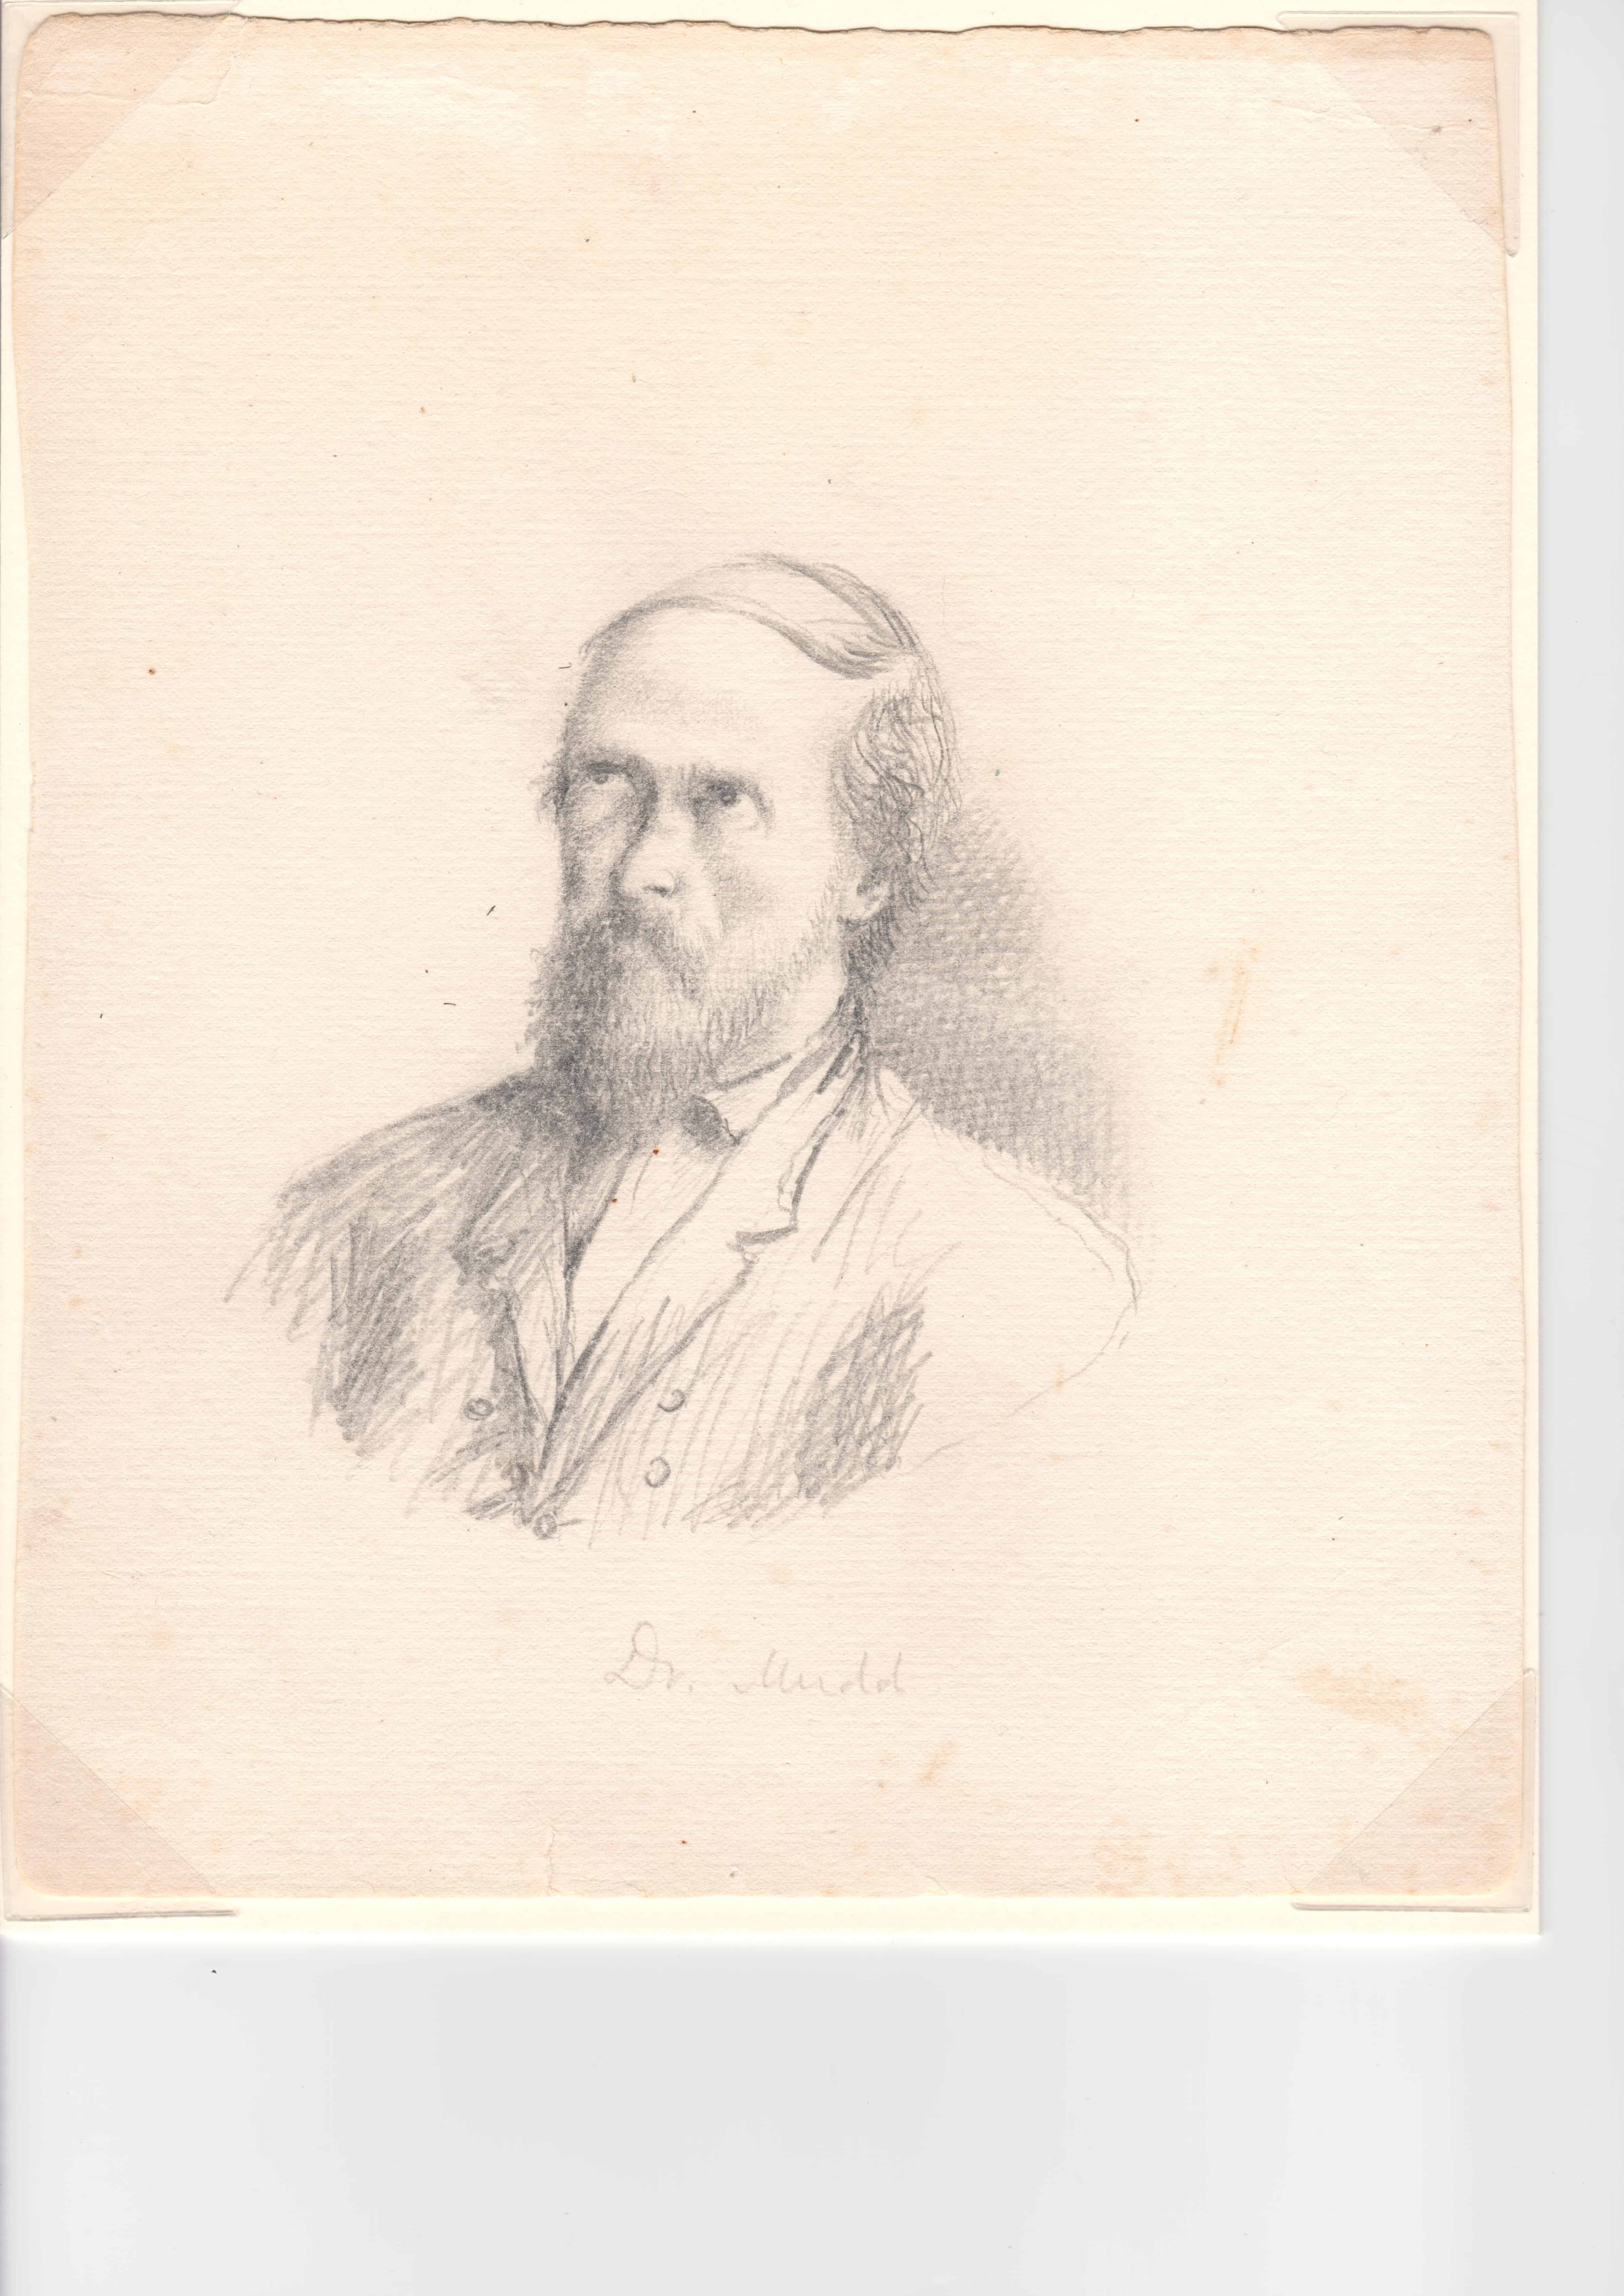 Lew Wallace's sketch of Dr. Samuel Mudd, one of the Lincoln assassination conspirators.